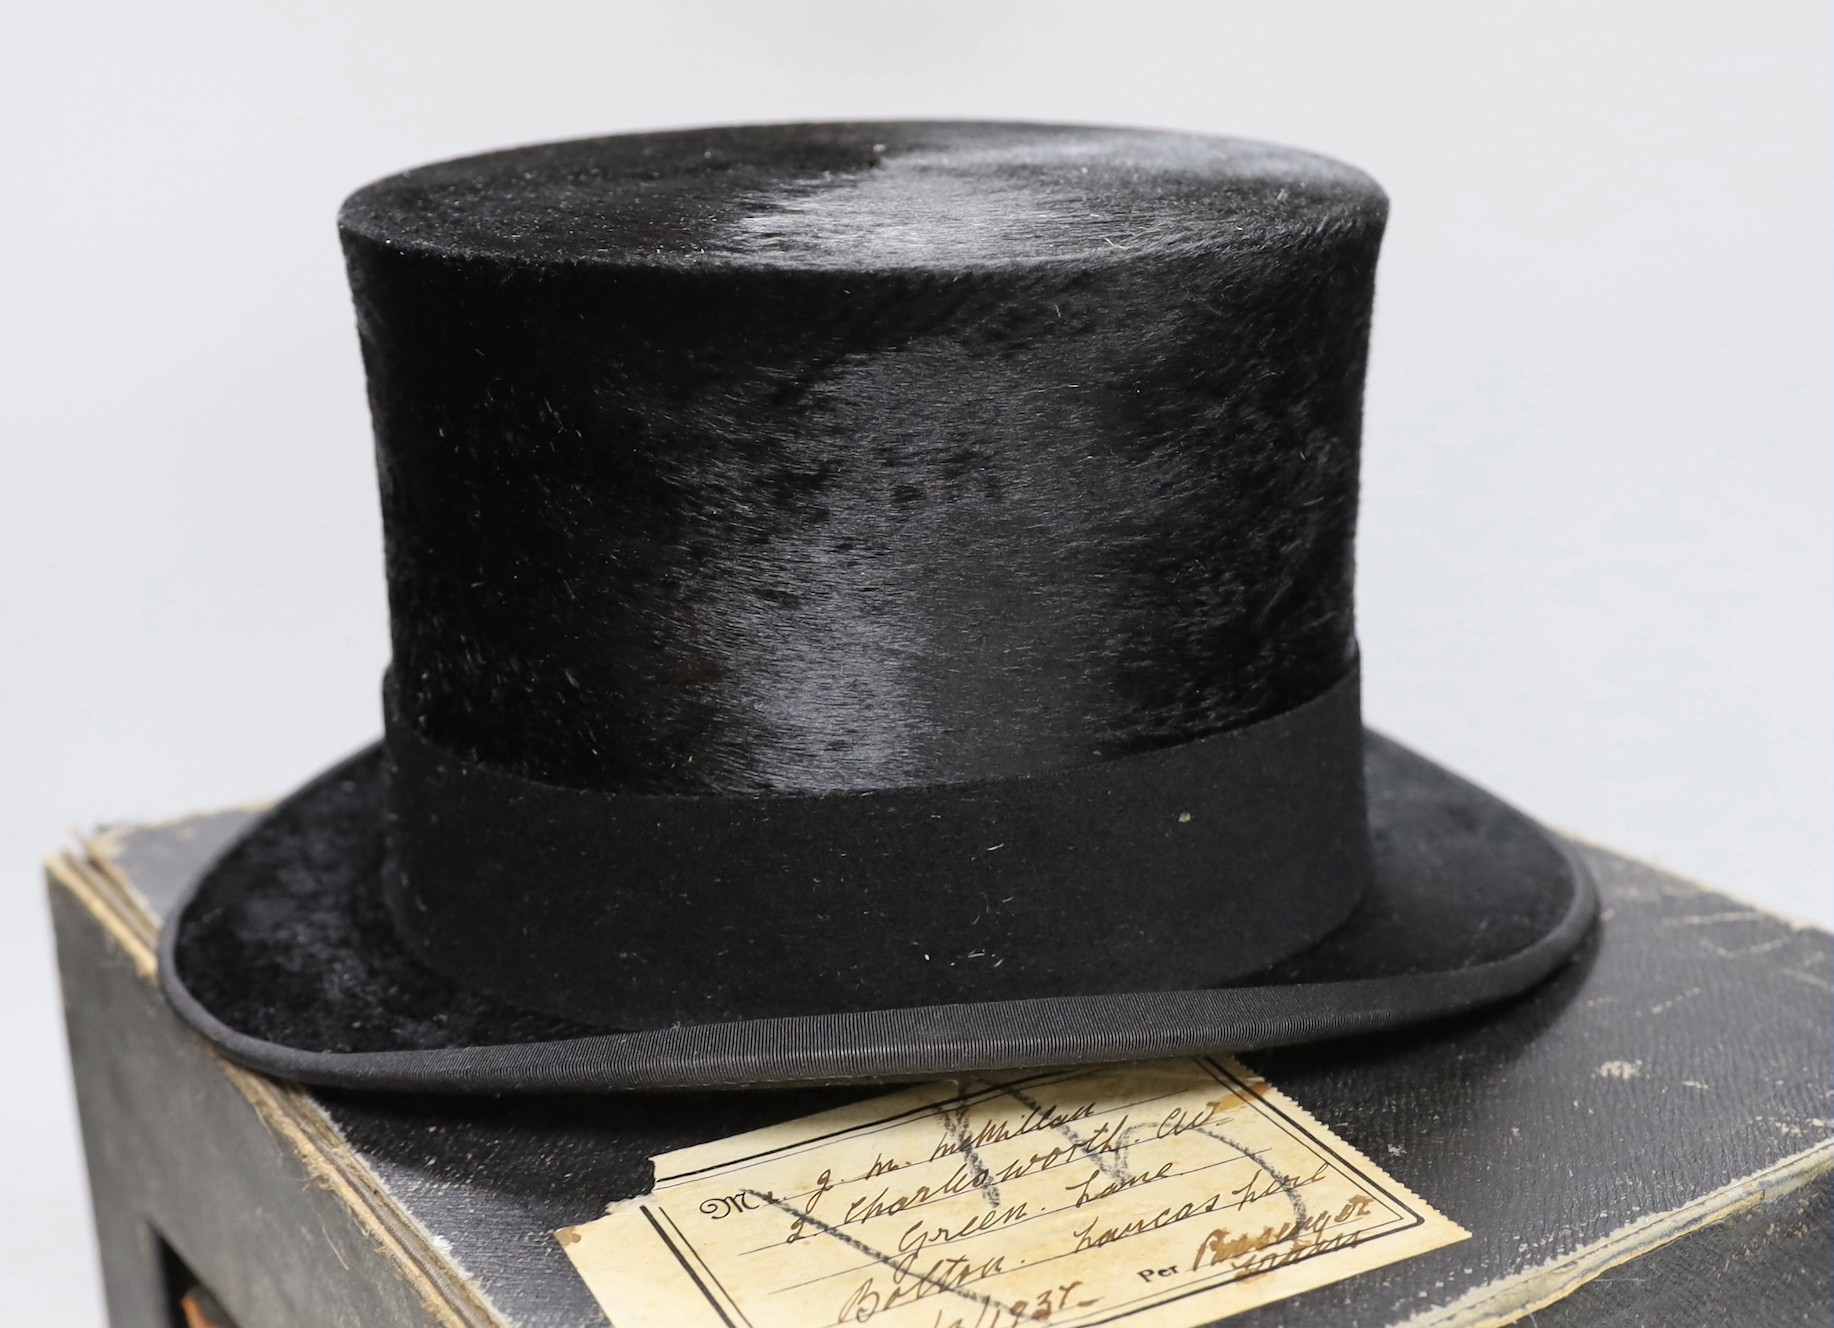 A boxed gentleman's black top hat, by Royal appointment: Woodrow, 45 Gordon St. Glasgow